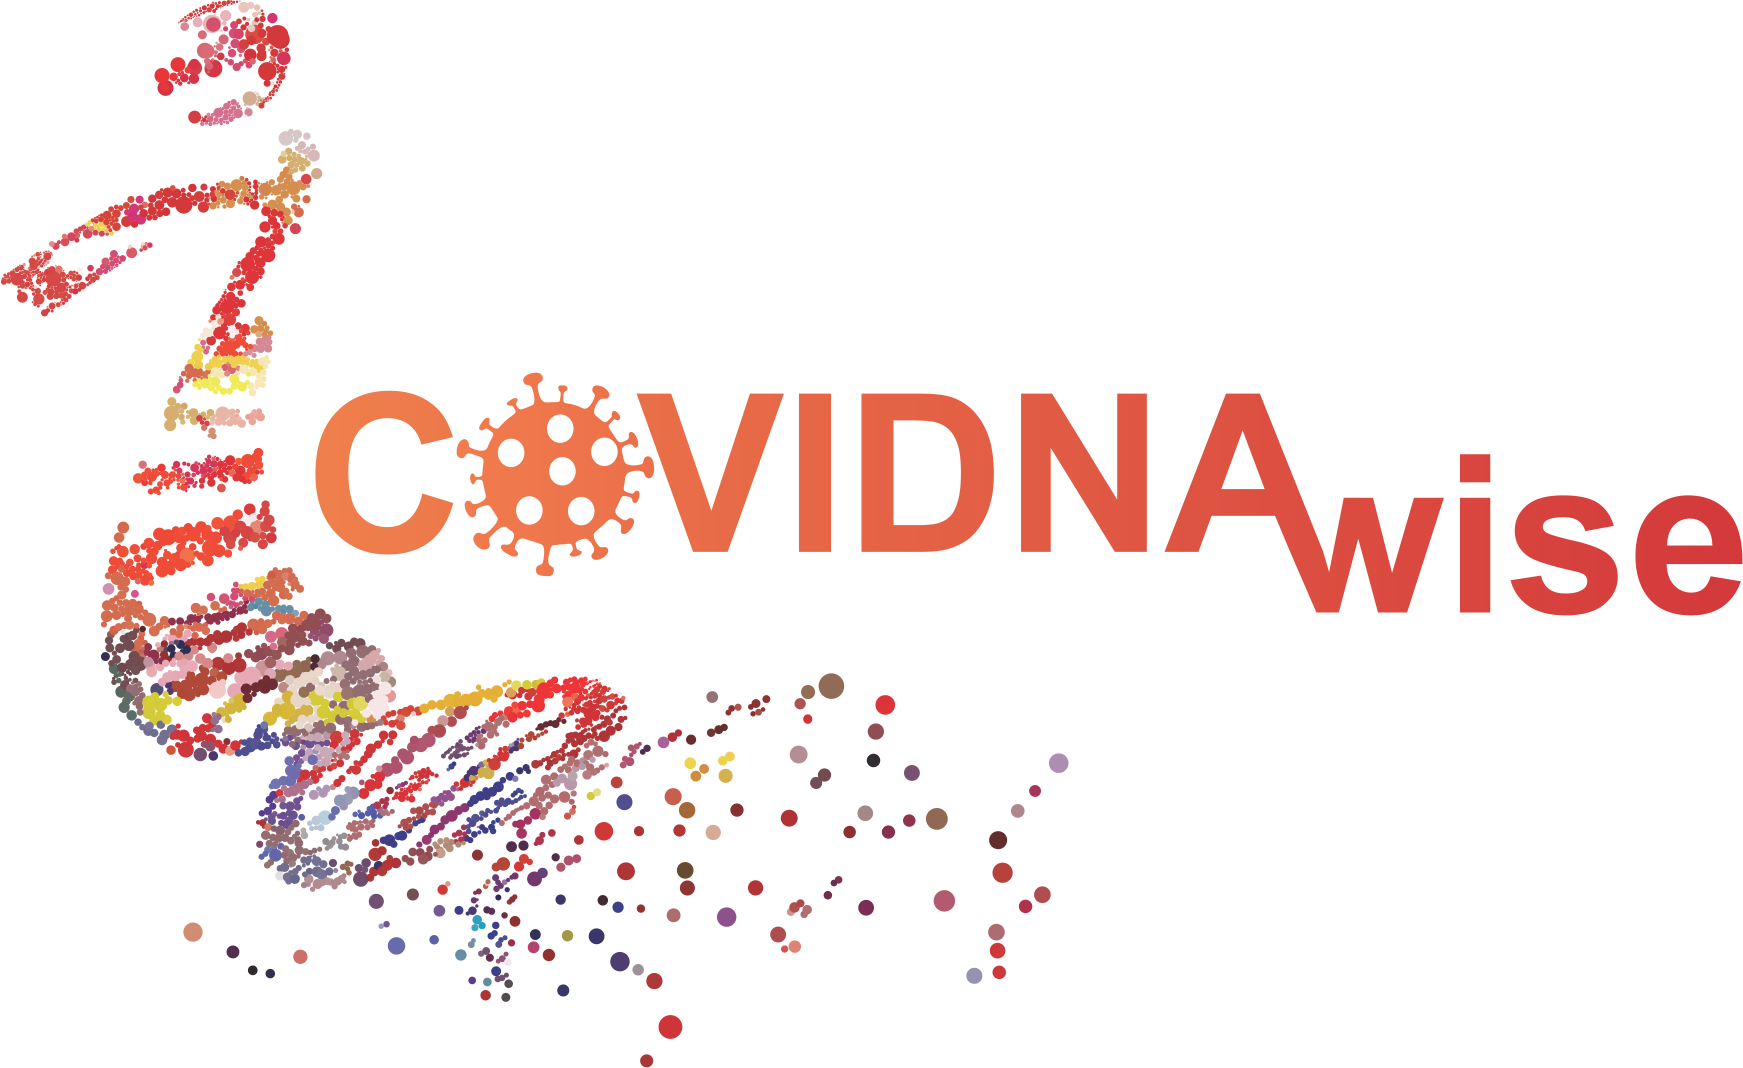 INDUS HEALTH PLUS LAUNCHES COVID GENOMICS TEST, COVIDNAwise